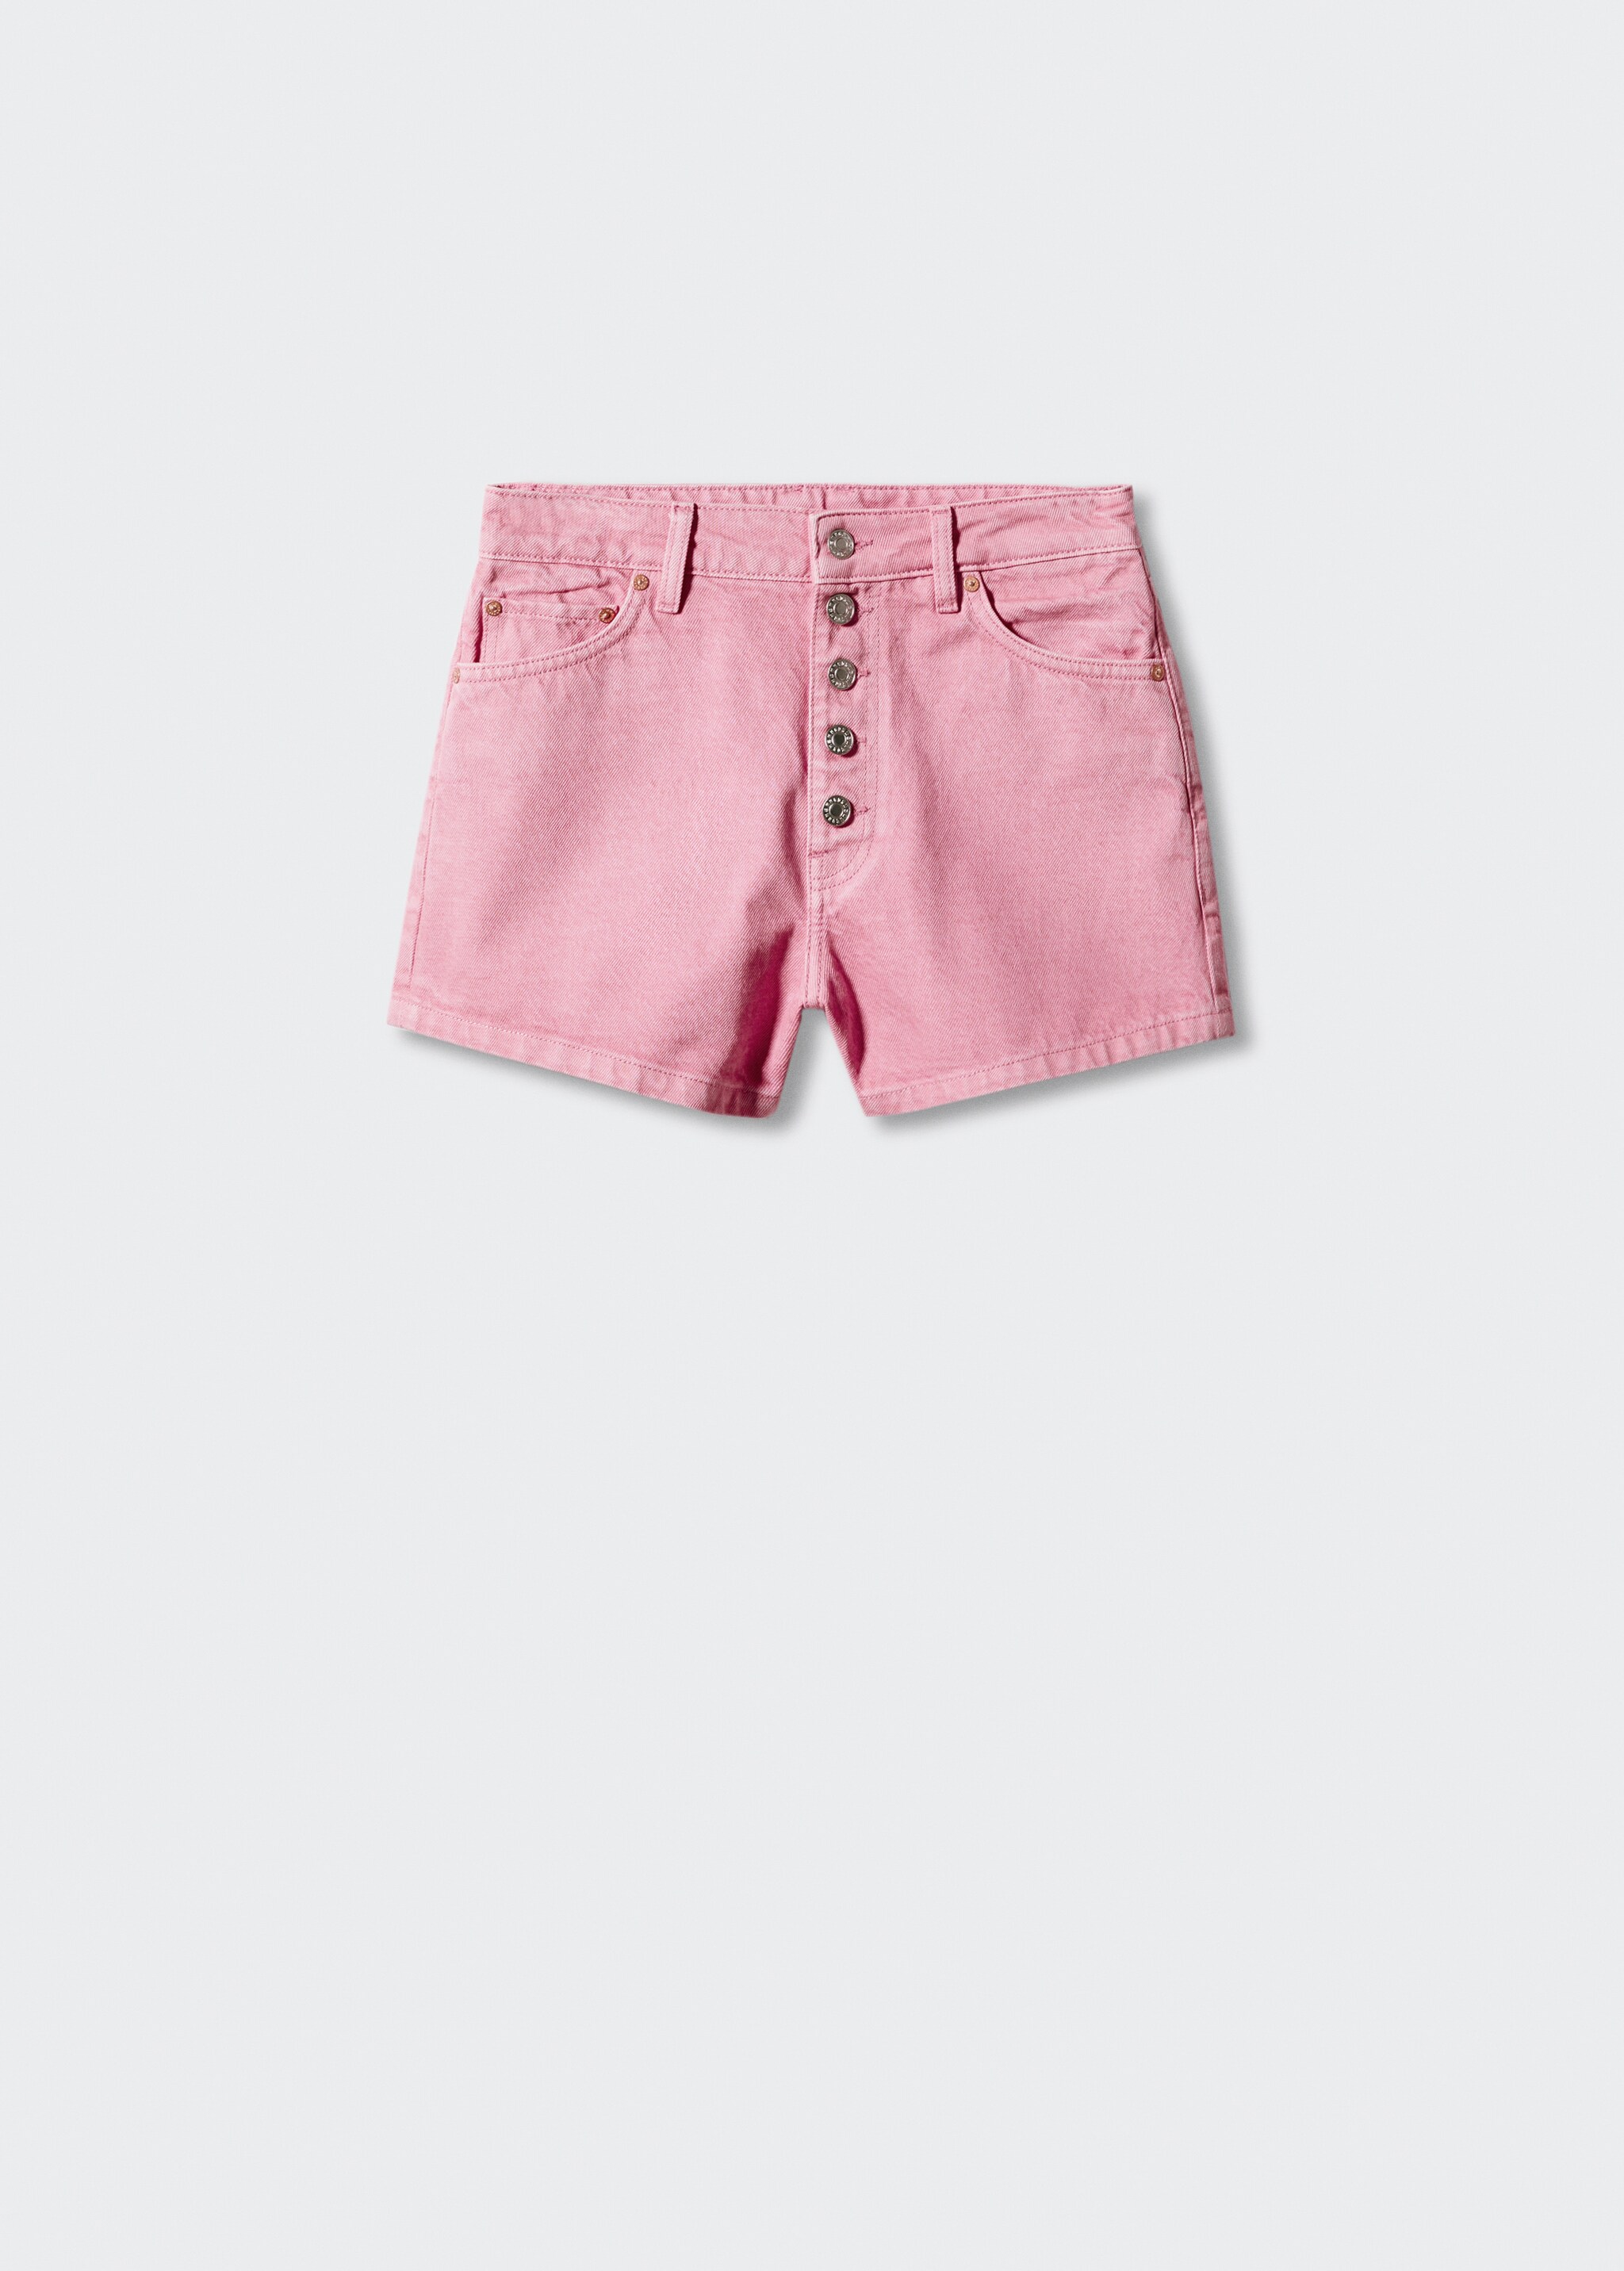 Denim shorts with buttons - Article without model